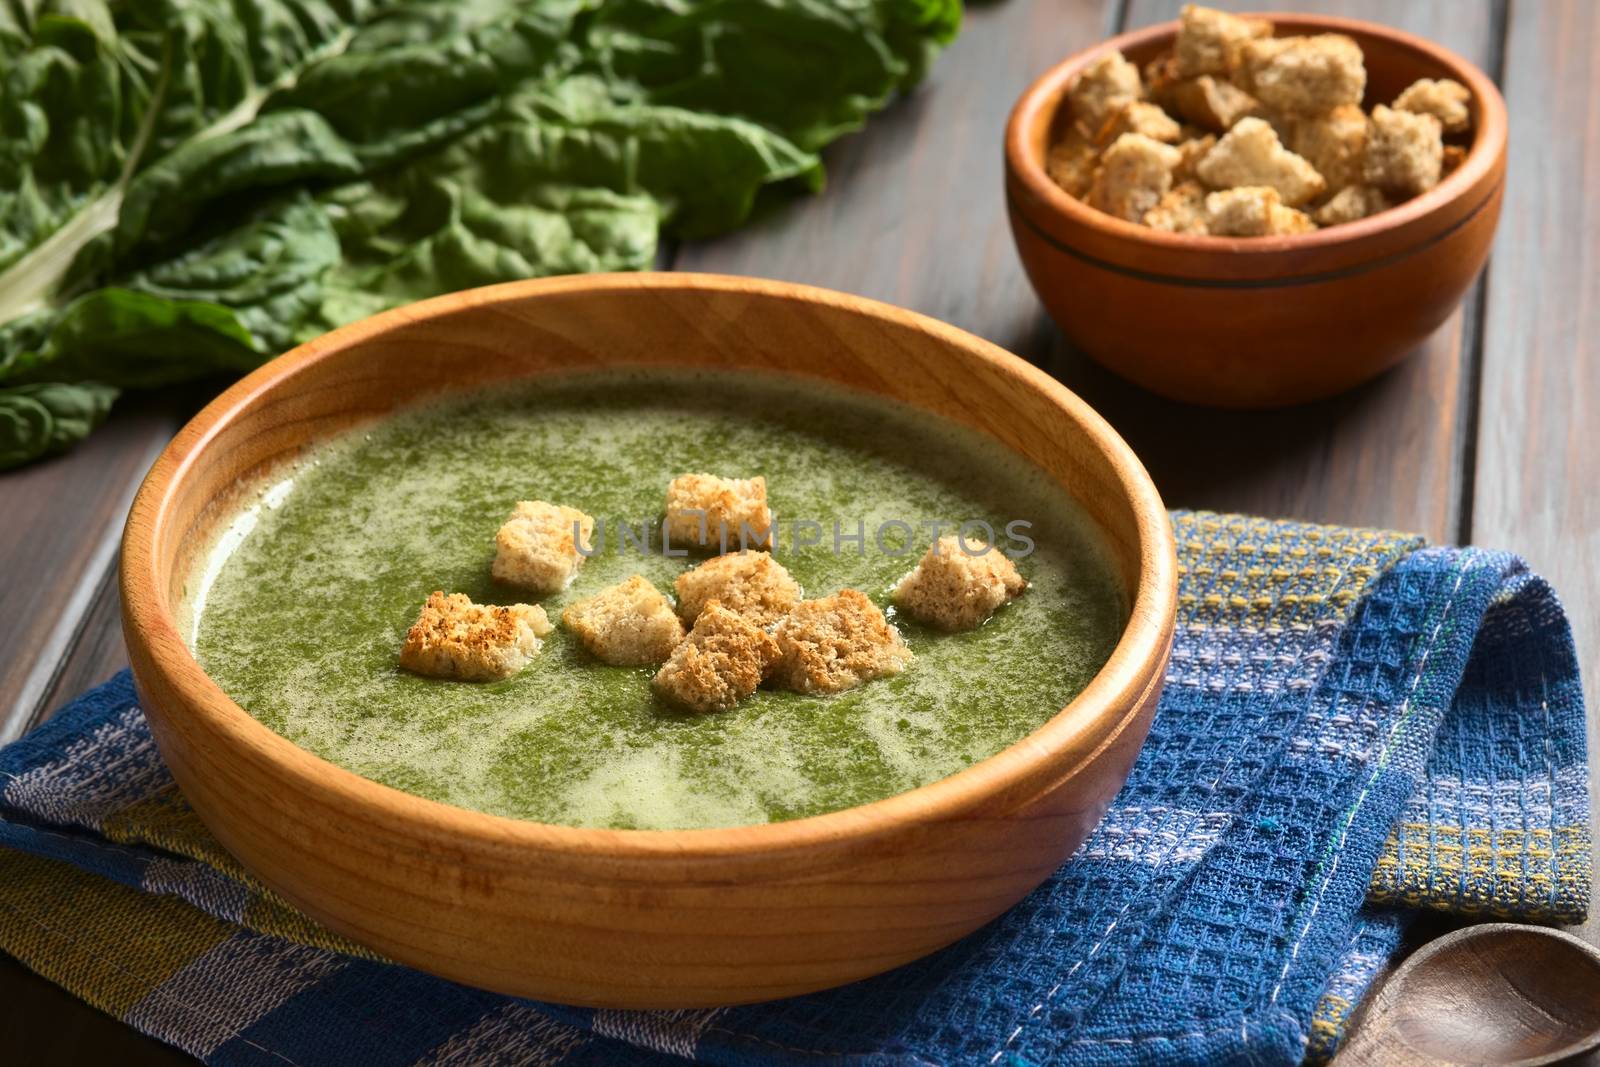 Cream of chard soup with croutons in wooden bowl, fresh raw chard leaves and a small bowl of croutons in the back, photographed on dark wood with natural light (Selective Focus, Focus on the first croutons)